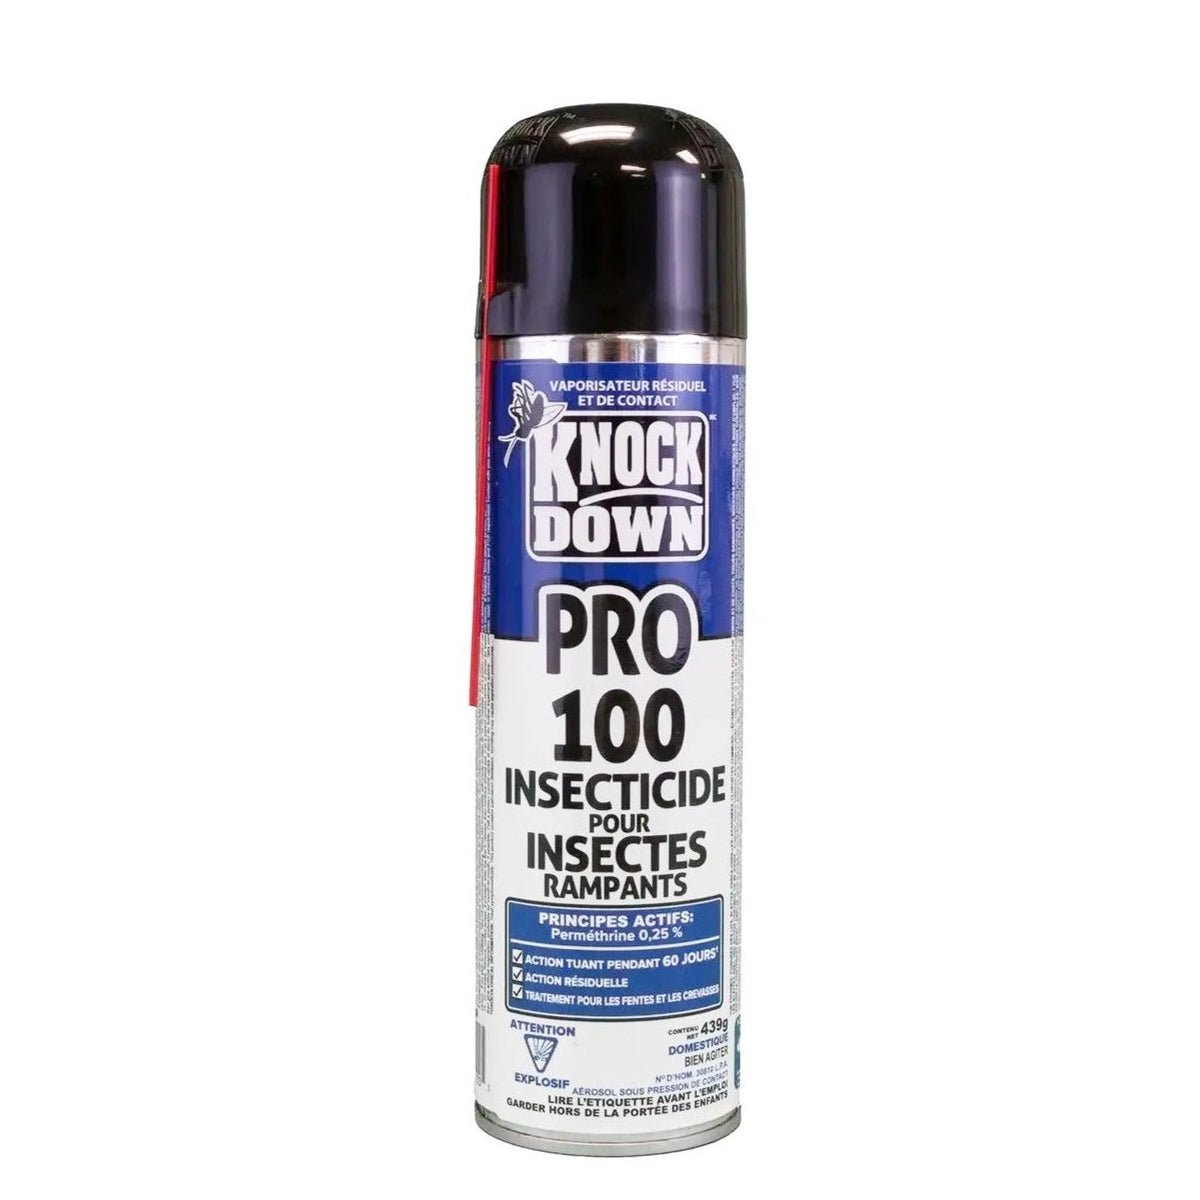 Insecticide for crawling insects - Knock Down Pro 100